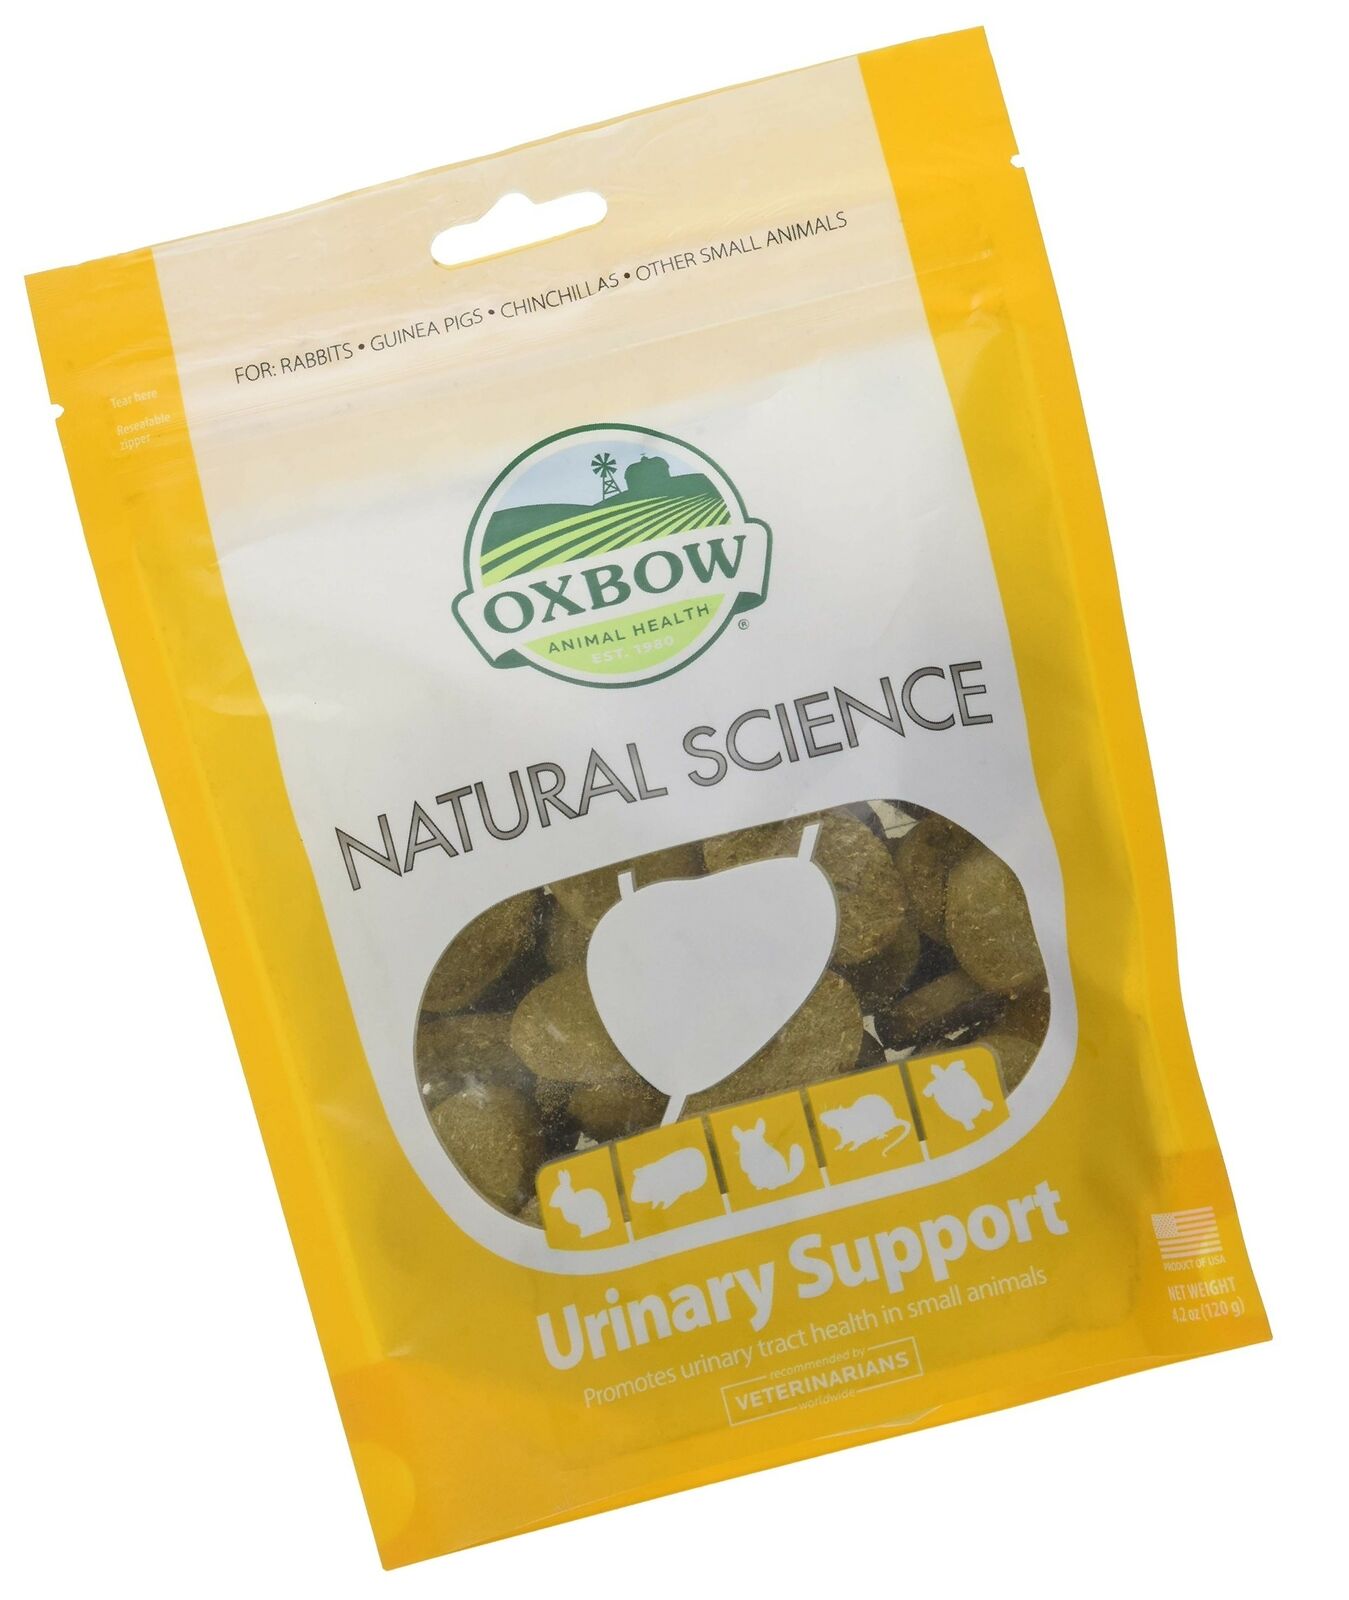 Oxbow Natural Science Urinary Support 4.2 Oz